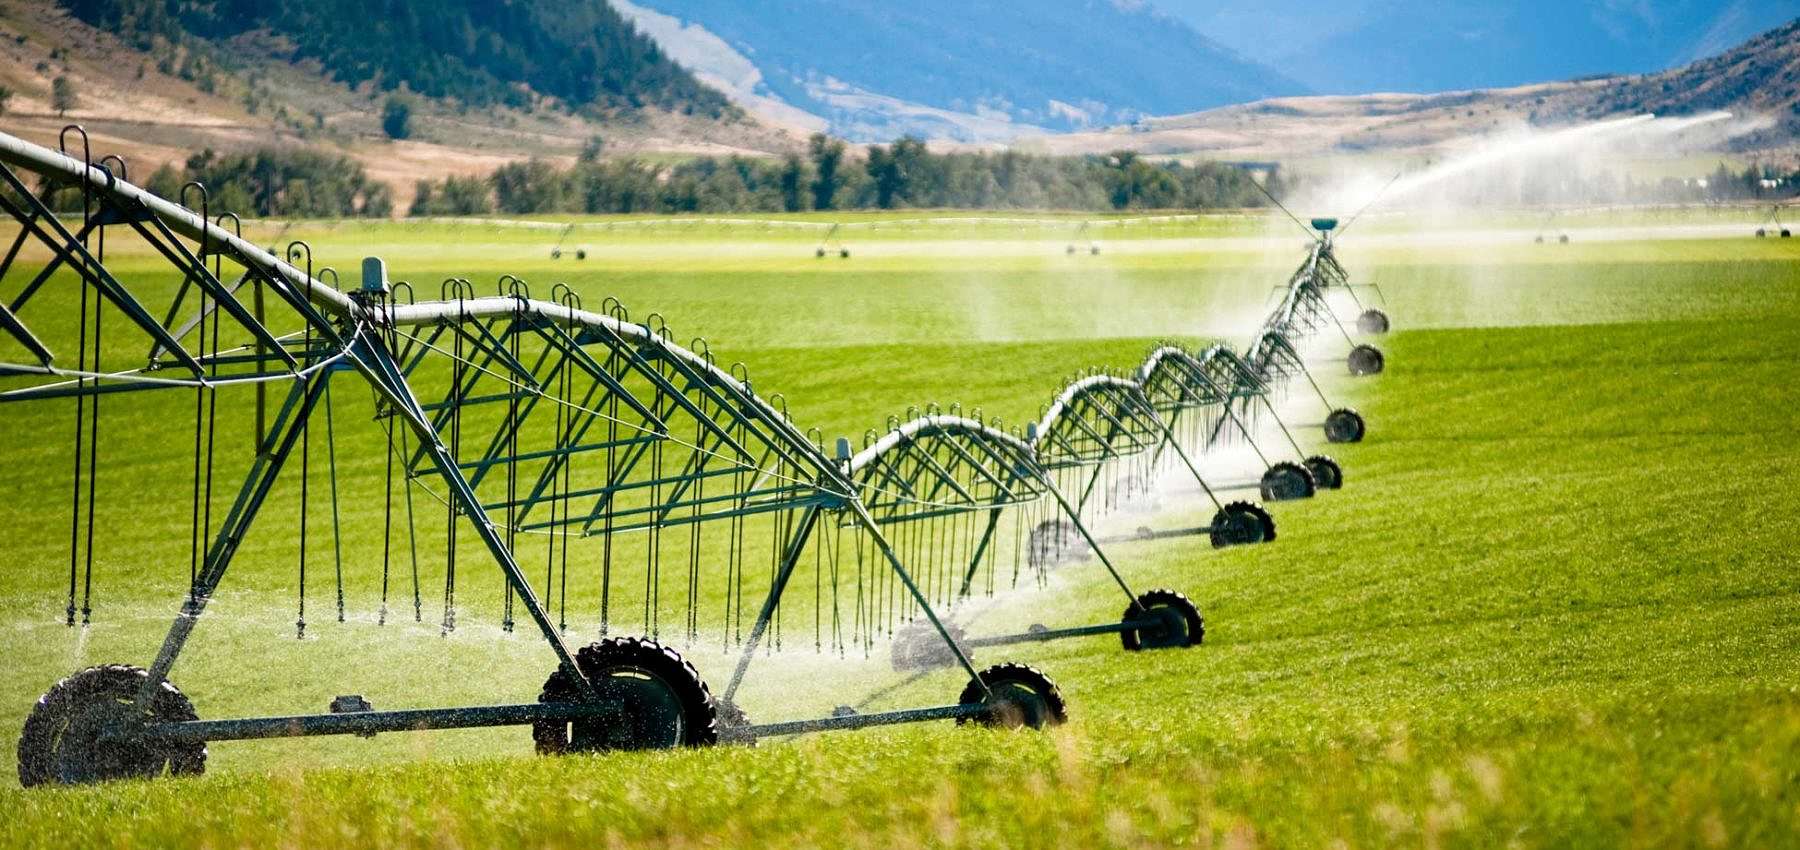 Large-scale agricultural irrigation